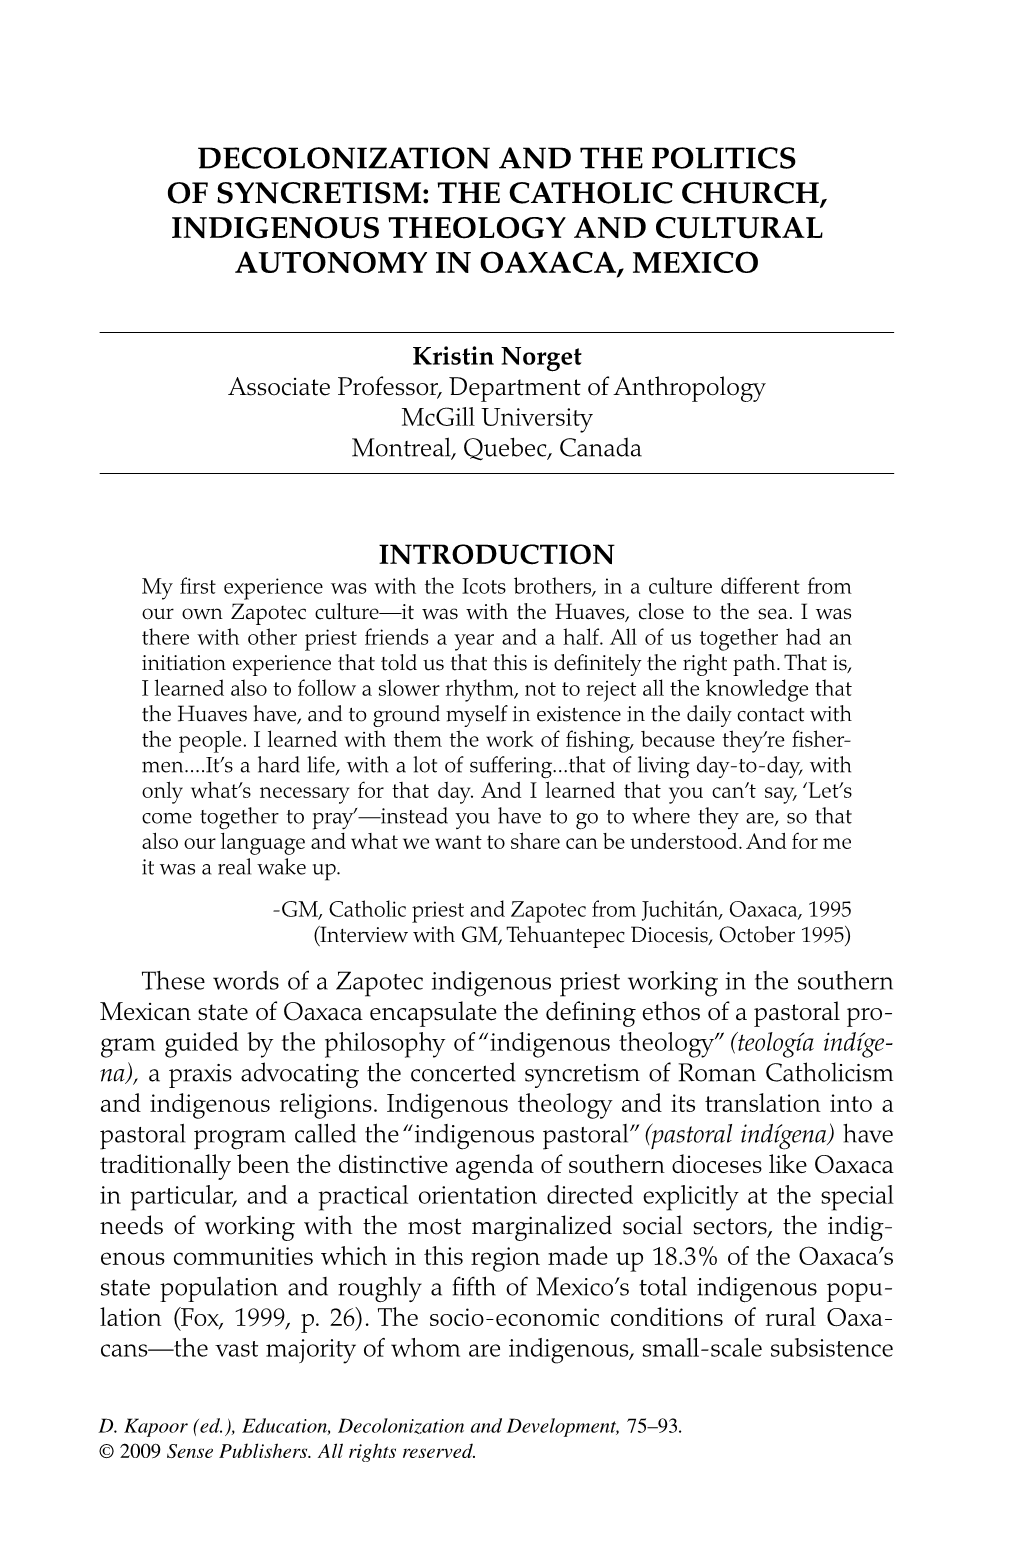 The Catholic Church, Indigenous Theology and Cultural Autonomy in Oaxaca, Mexico